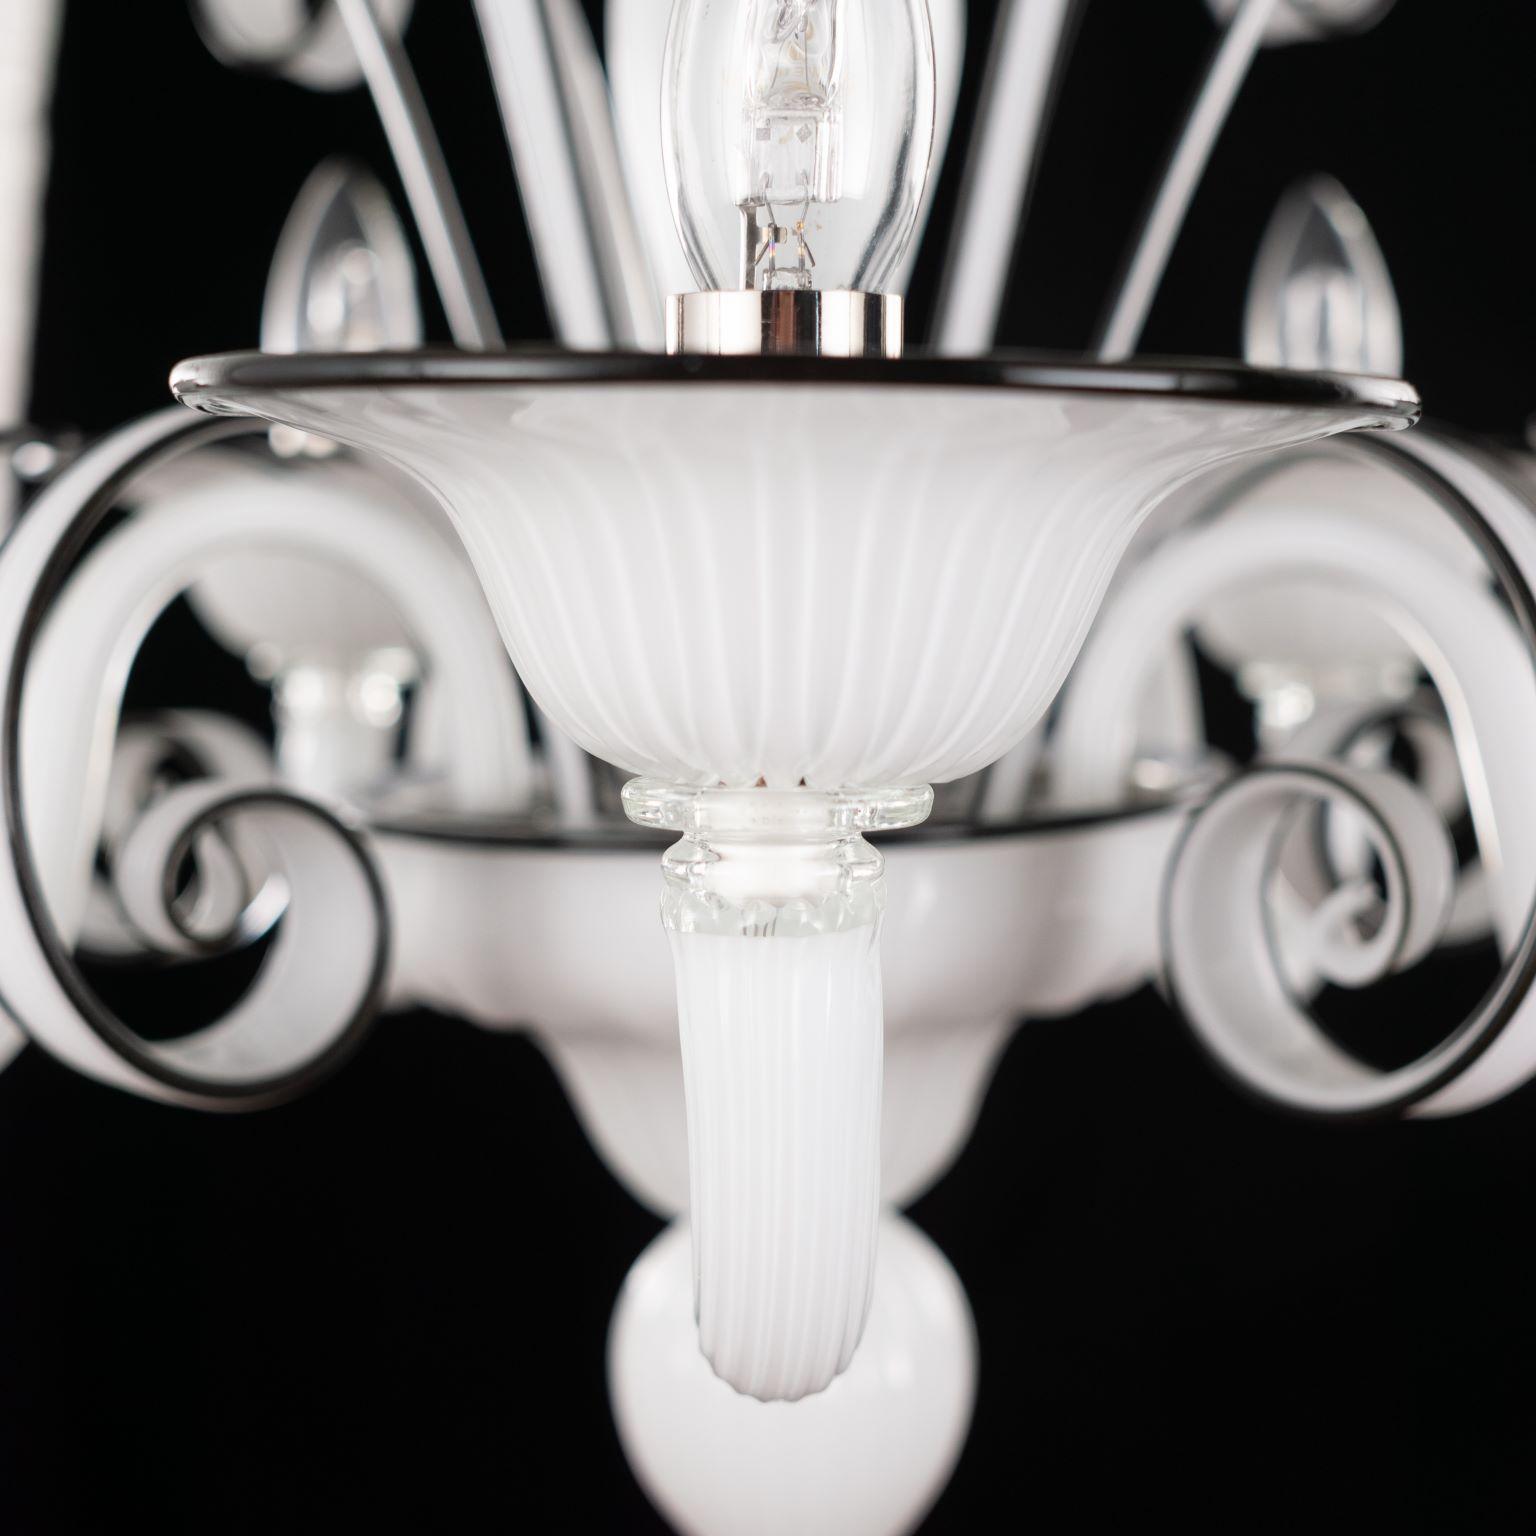 Italian Chandelier 5 Arms White Blown Artistic Murano Glass, Black Details by Multiforme For Sale